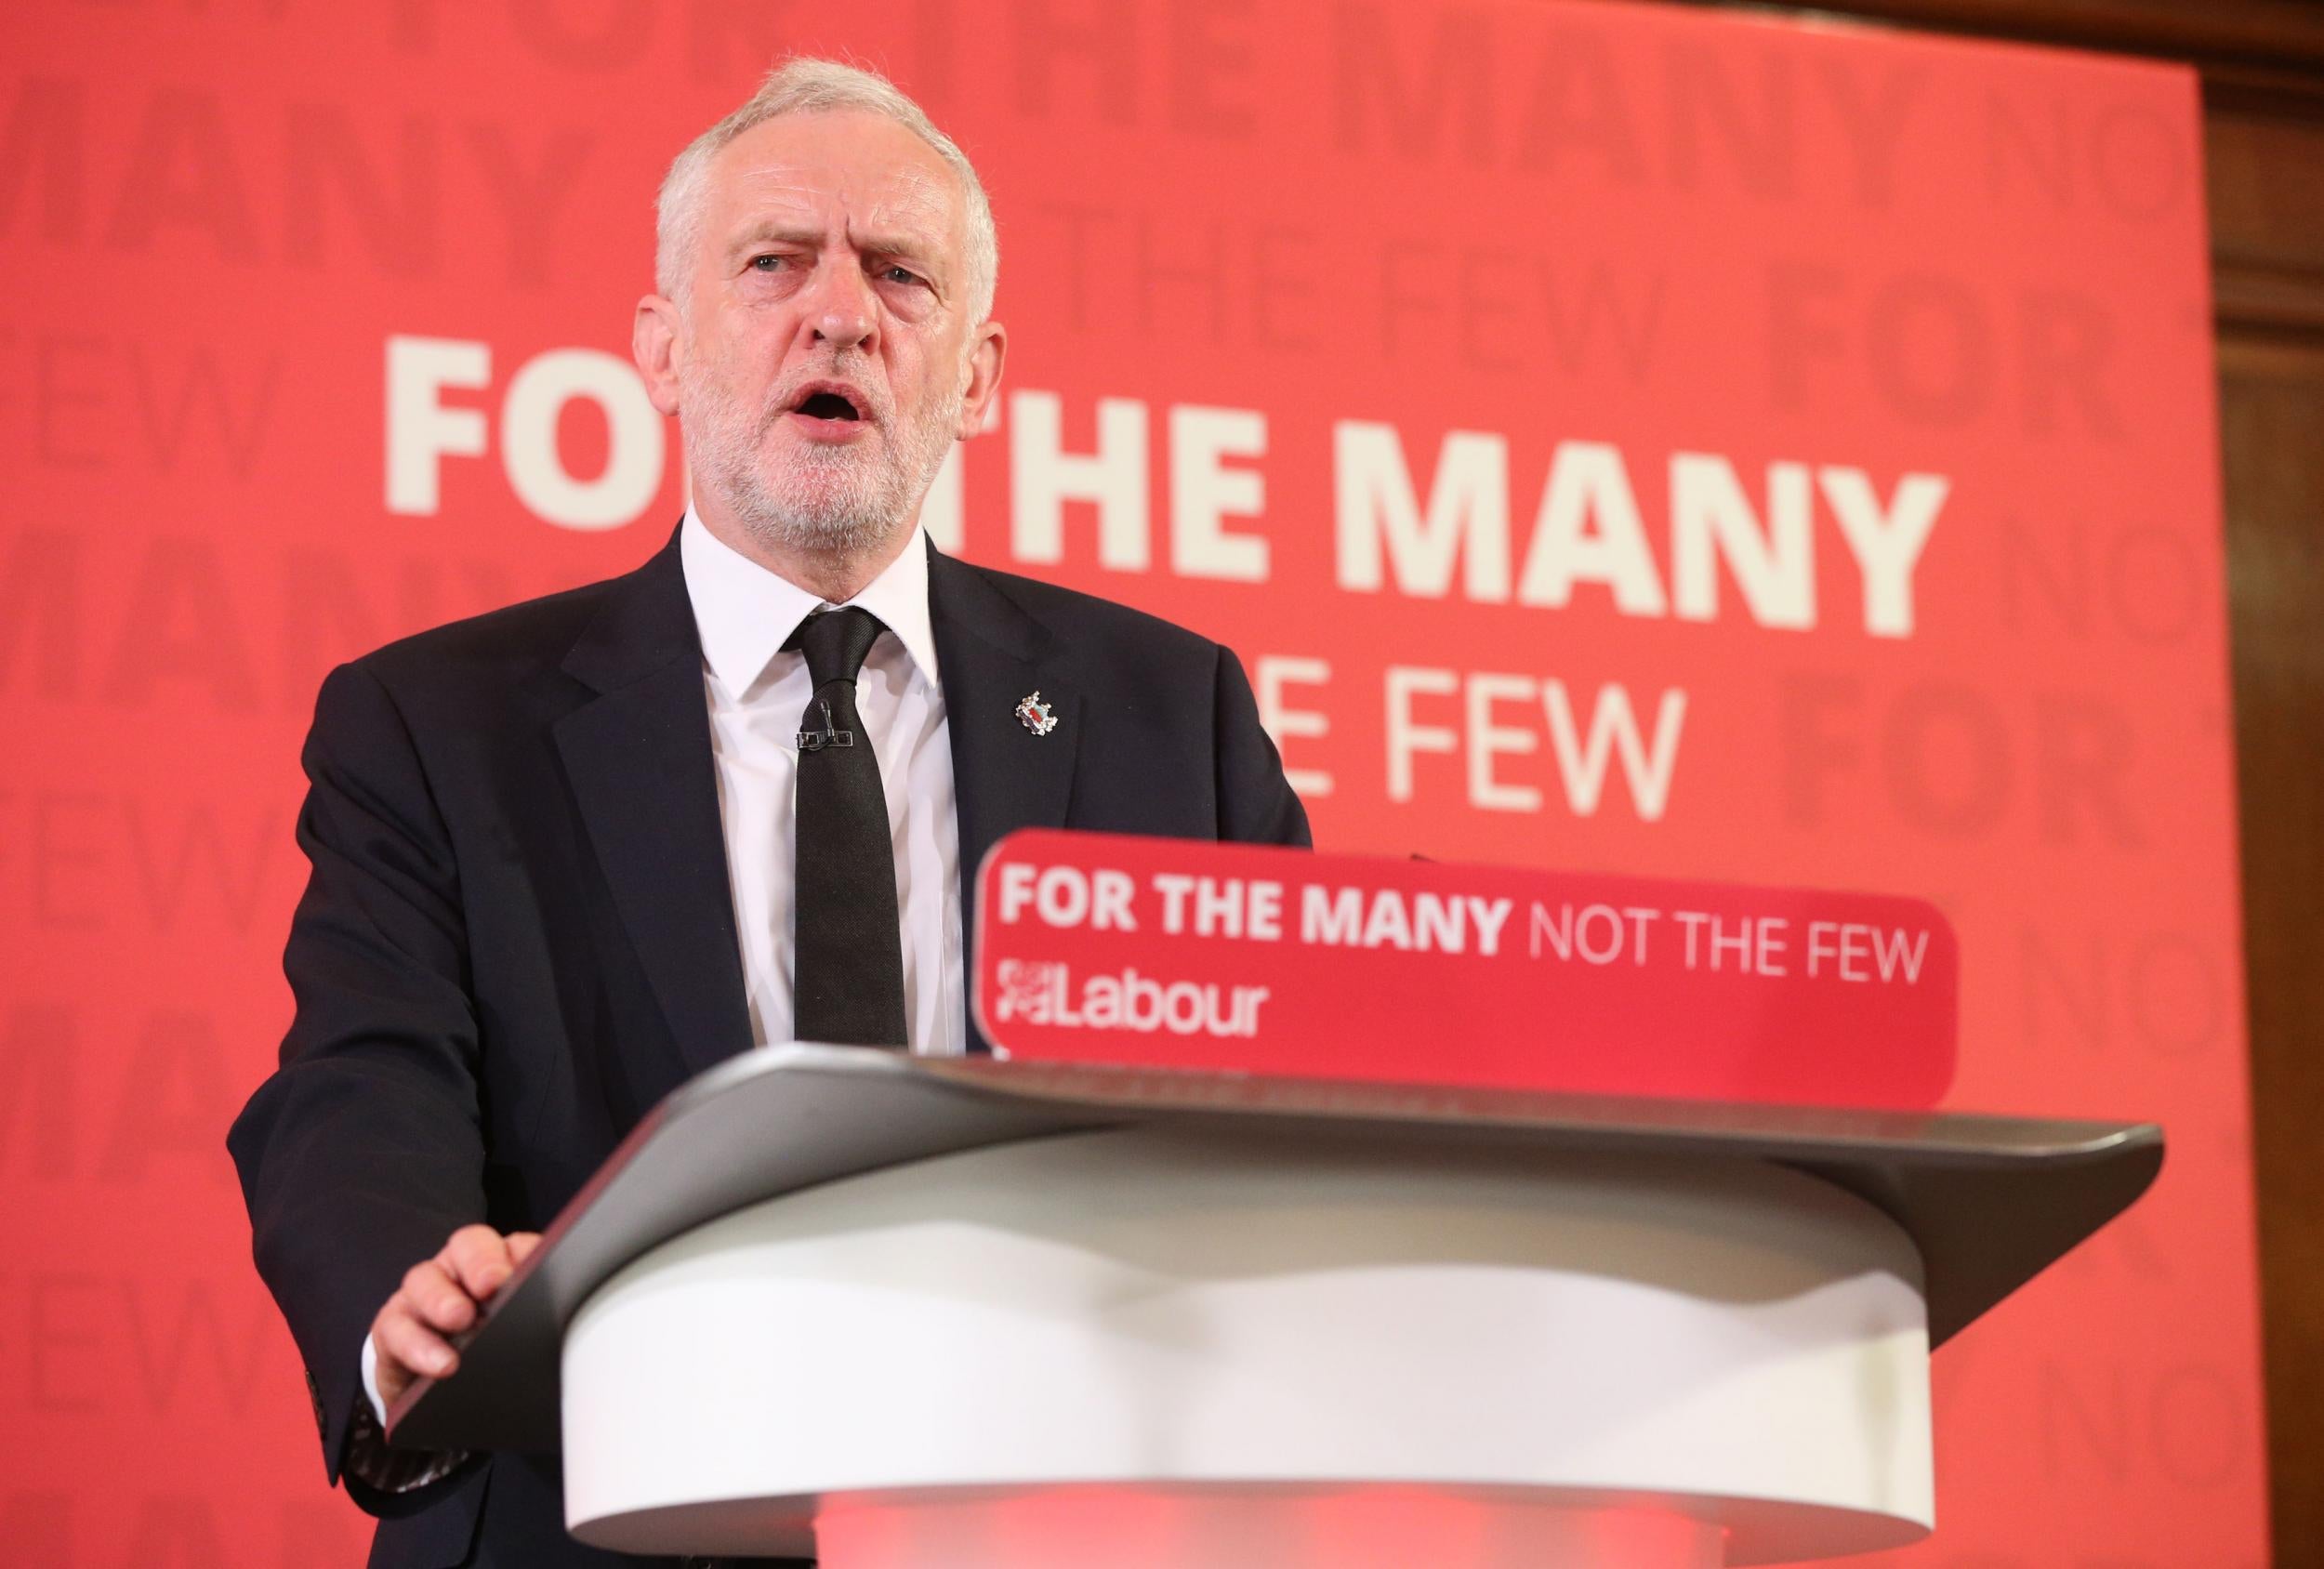 Jeremy Corbyn said he would be prepared to do "whatever is necessary" to defeat terrorism